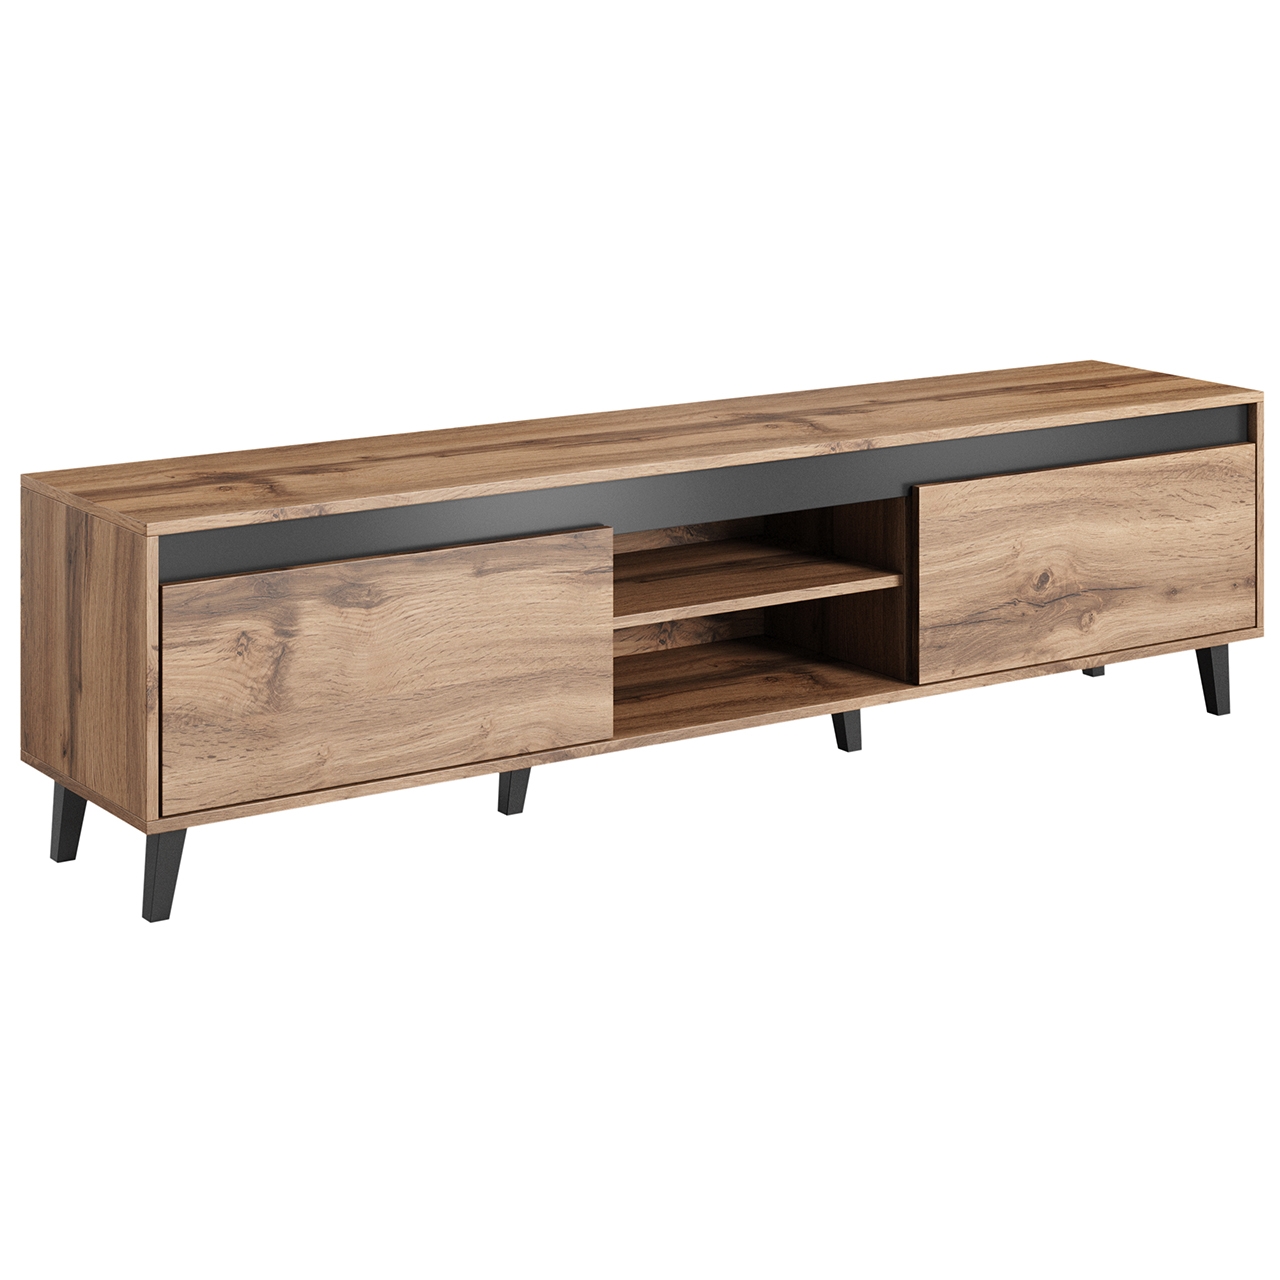 TV Stand NORD II 170 wotan oak / anthracite